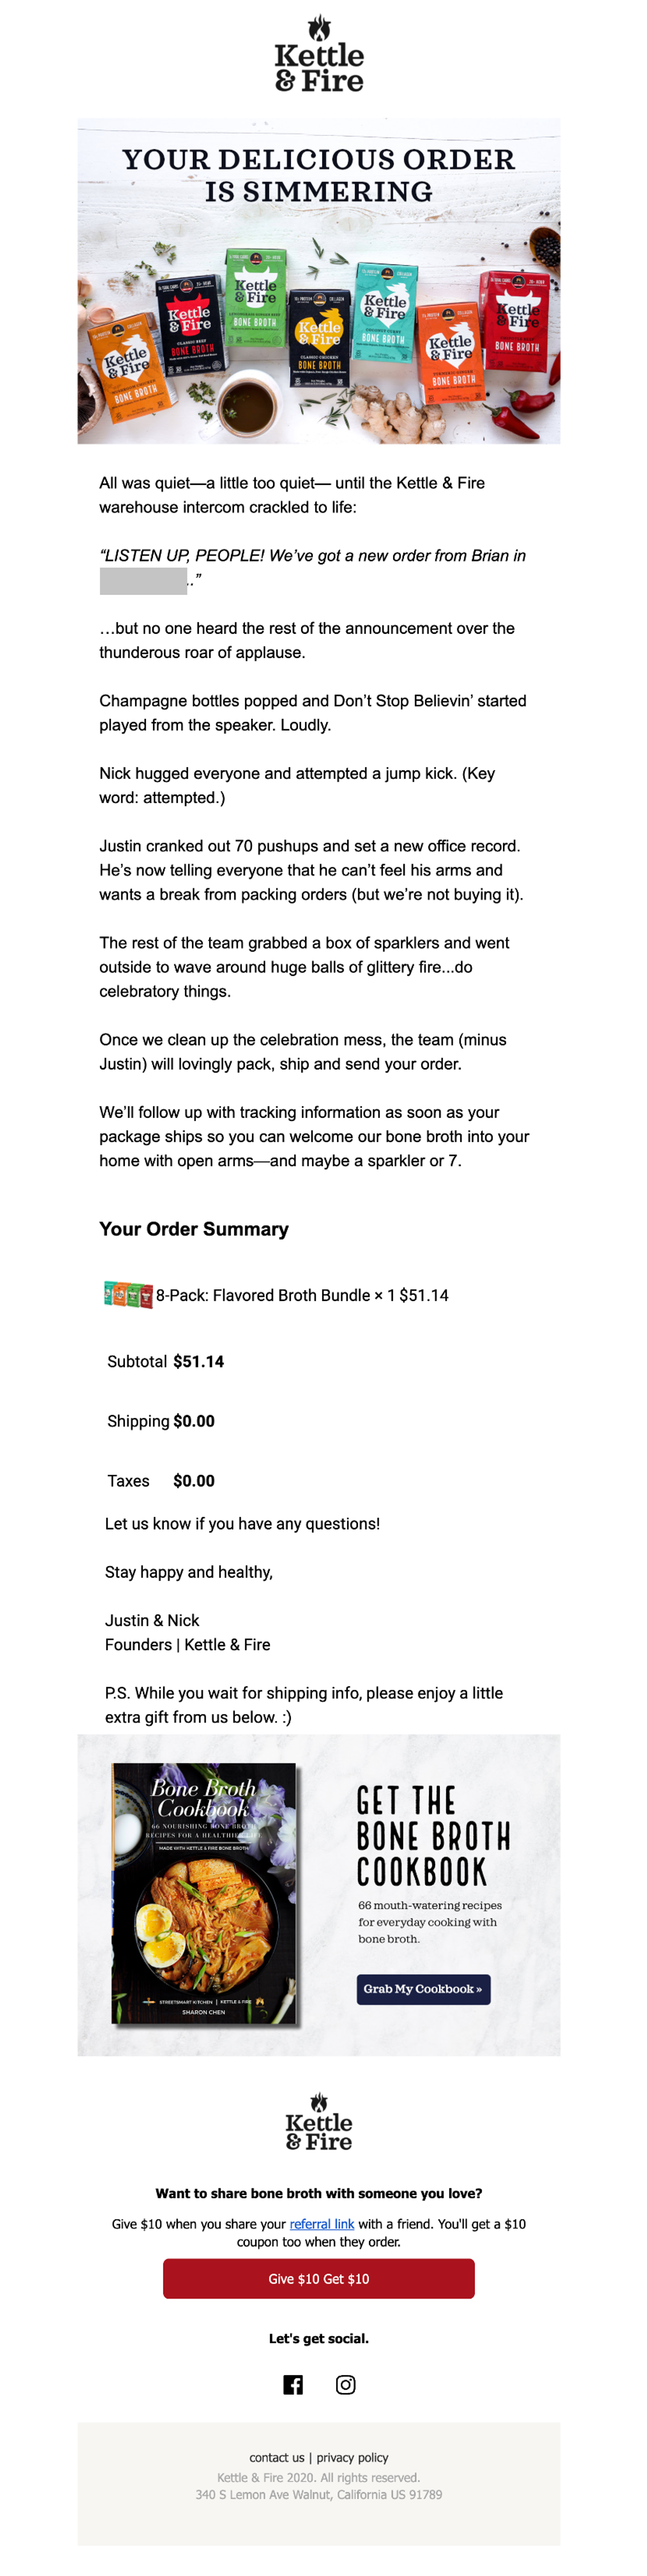 Kettle & Fire Order Confirmation Industry Email Template screenshot